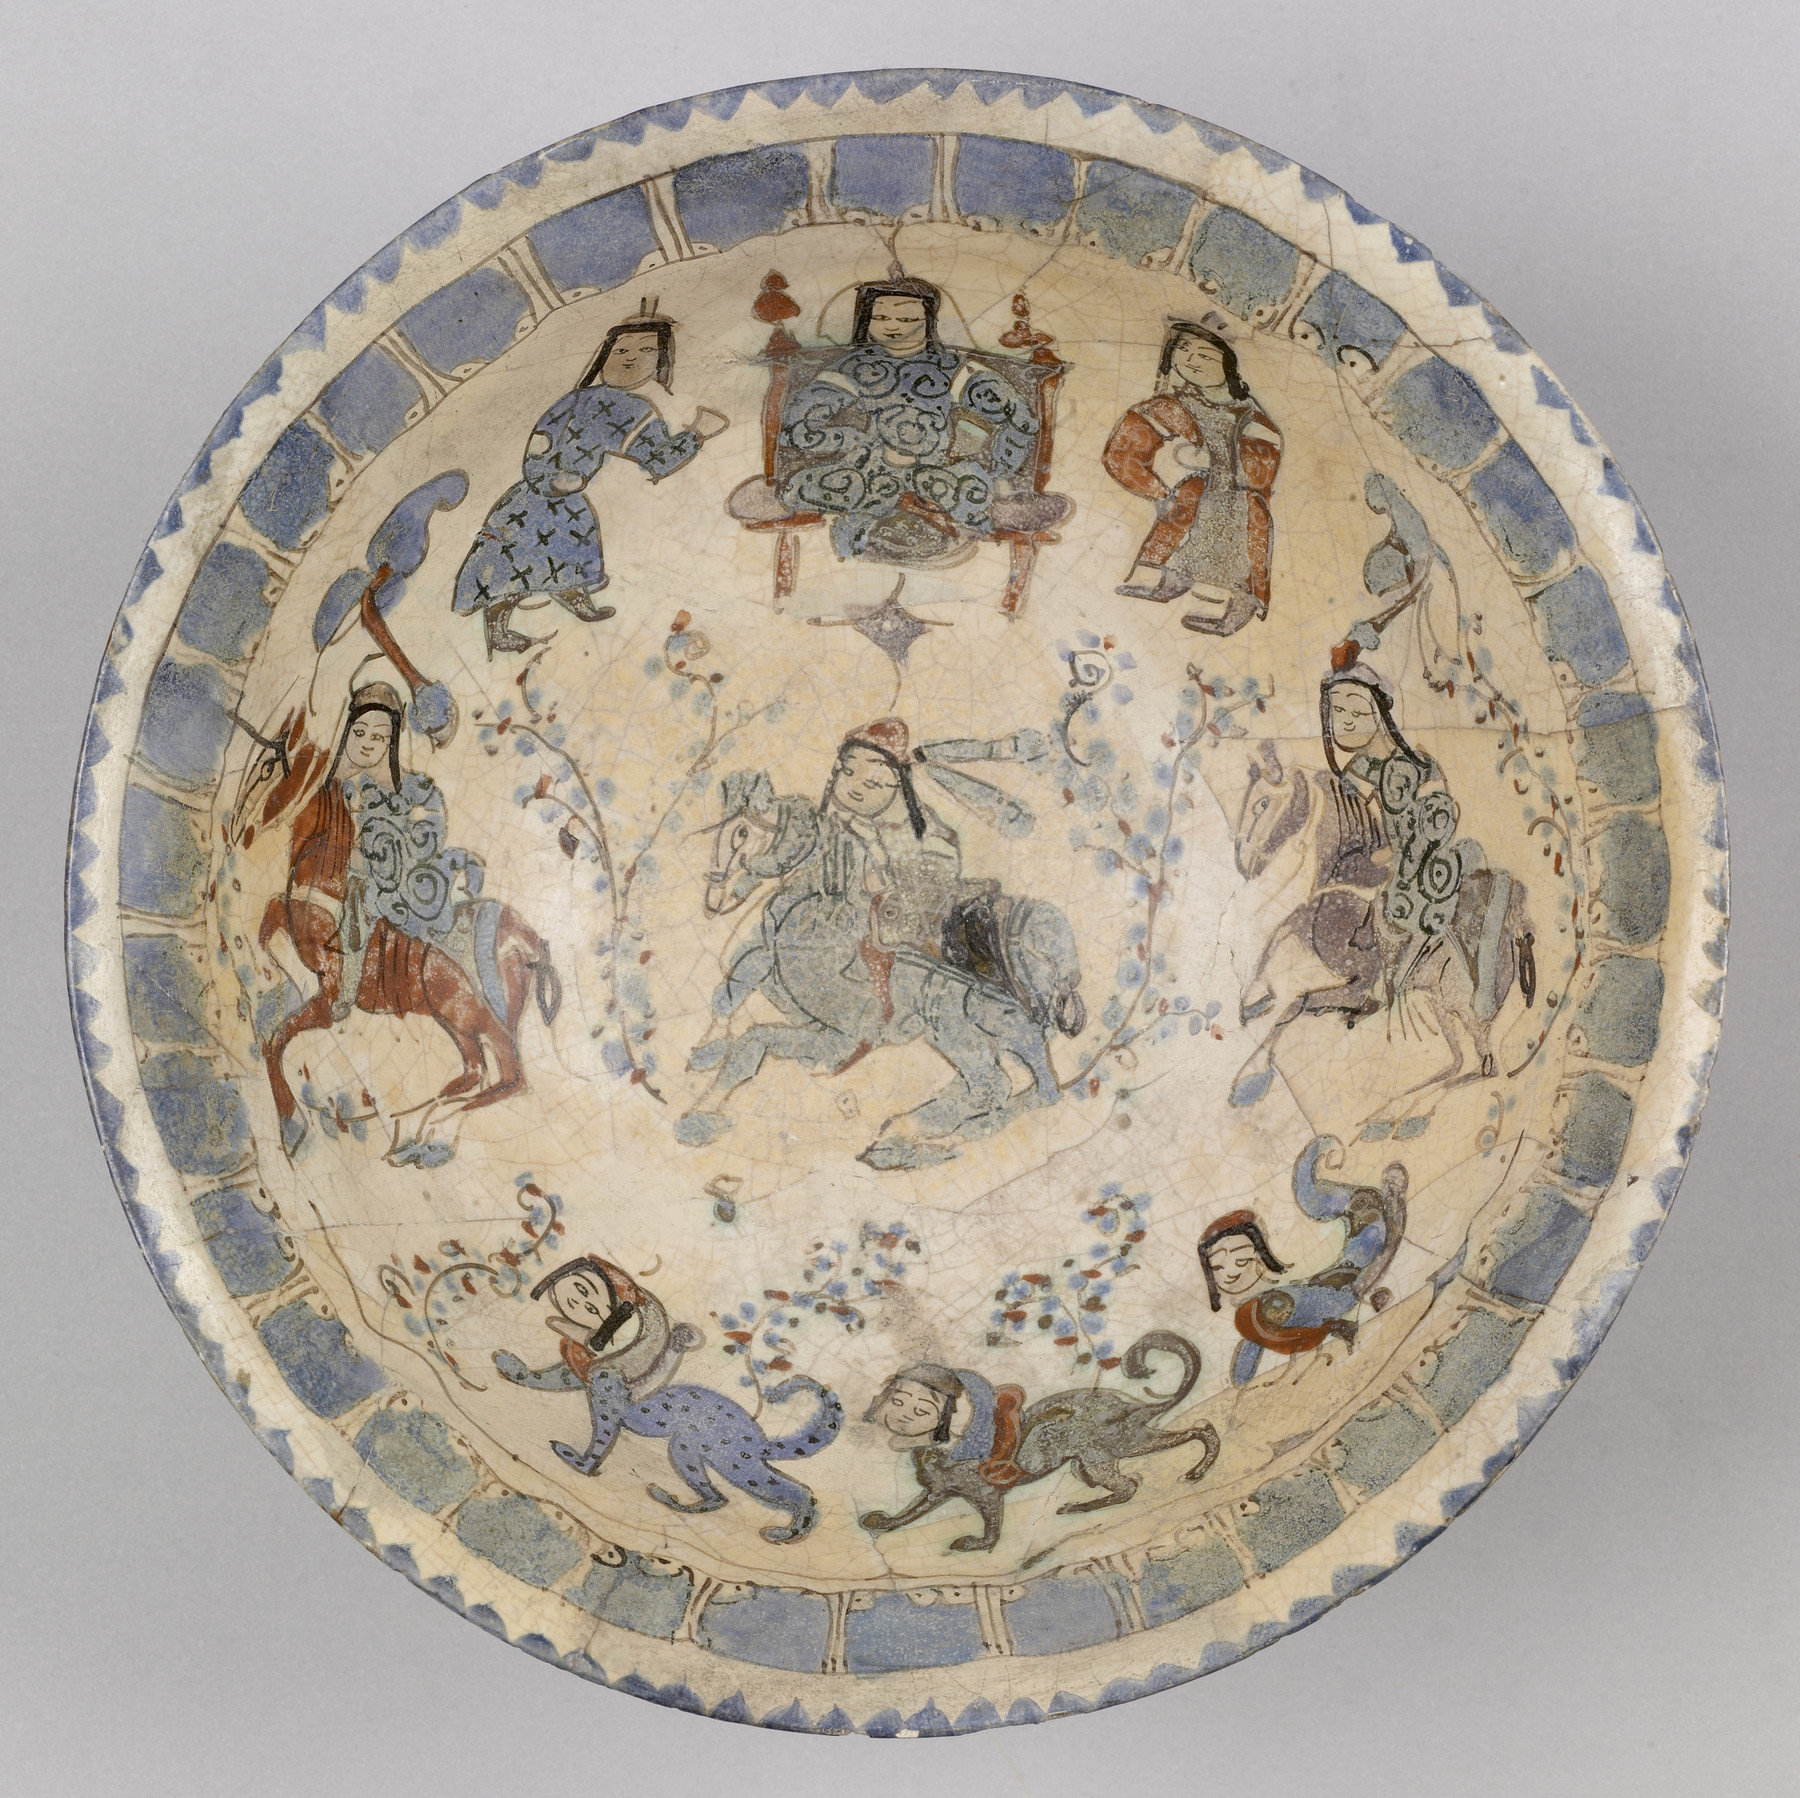 Image for Bowl with Horsemen, Enthroned Ruler, and Harpies